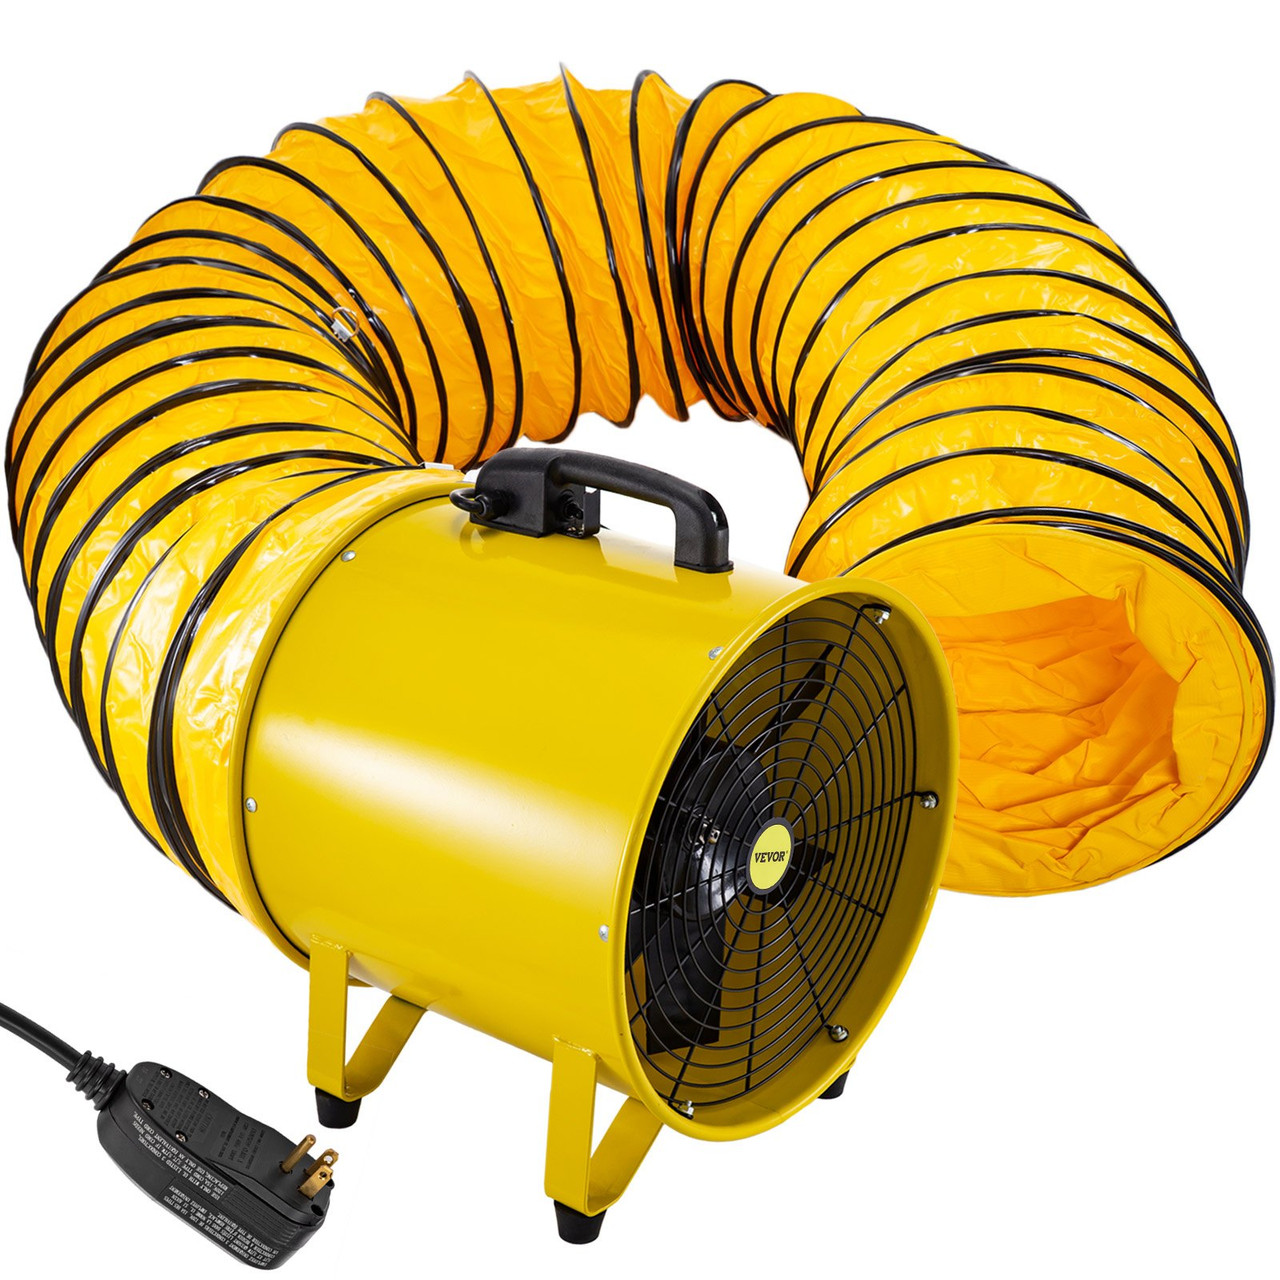 Utility Blower Fan, 16 Inches, 1100W 2160 & 3178 CFM High Velocity  Ventilator w/ 16 ft/5 m Duct Hose, Portable Ventilation Fan, Fume Extractor  for Exhausting & Ventilating at Home and Job Site